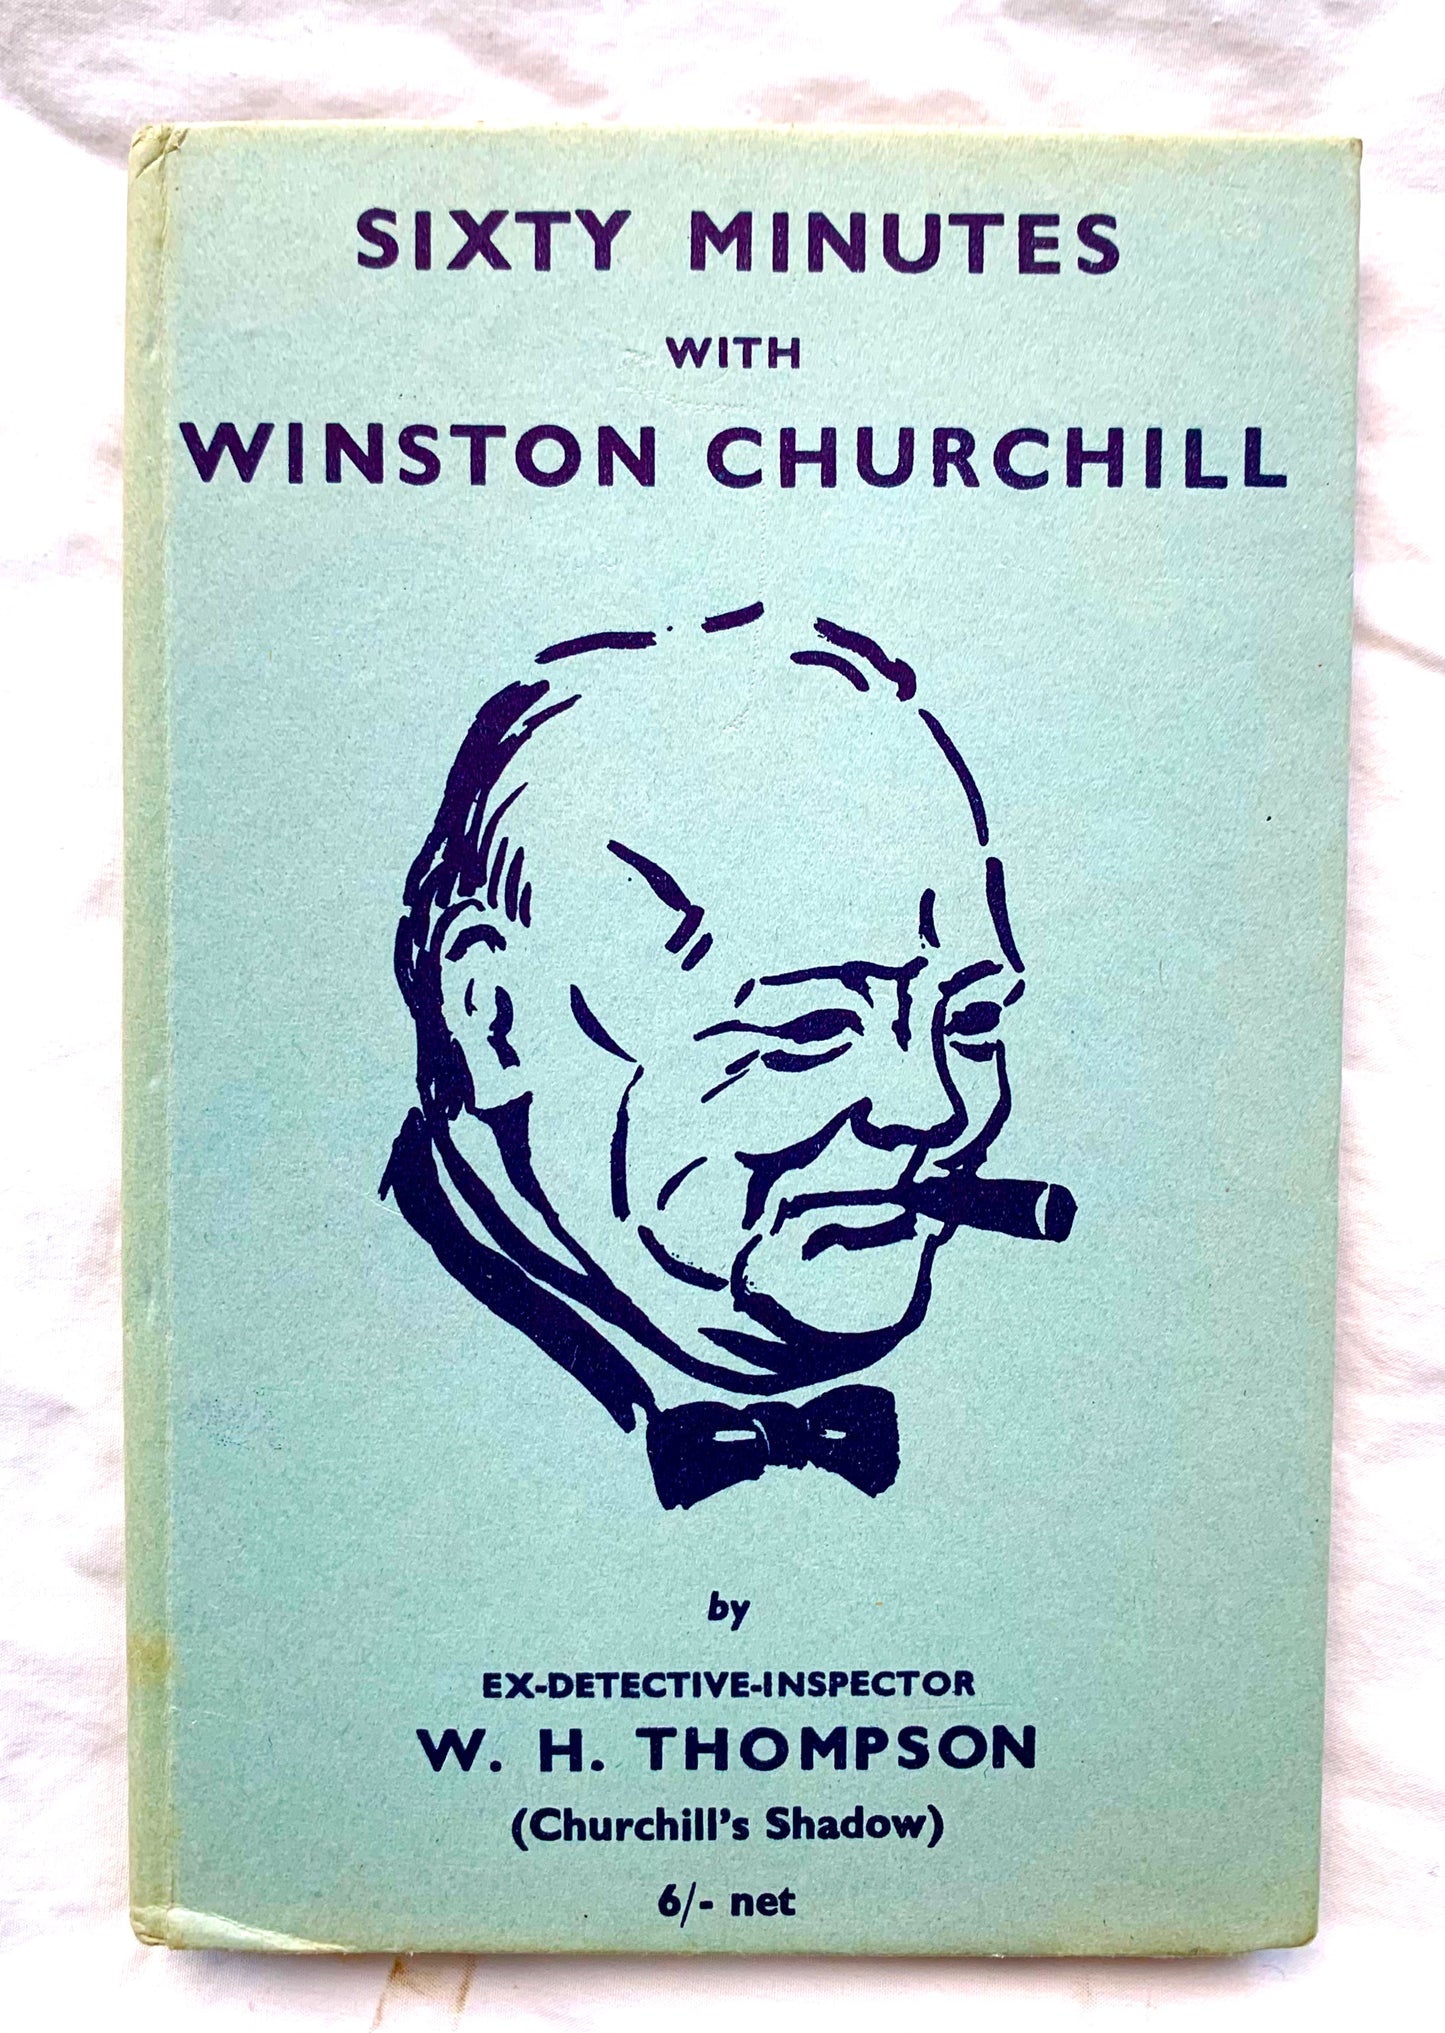 Sixty Minutes with Winston Churchill original autograph.